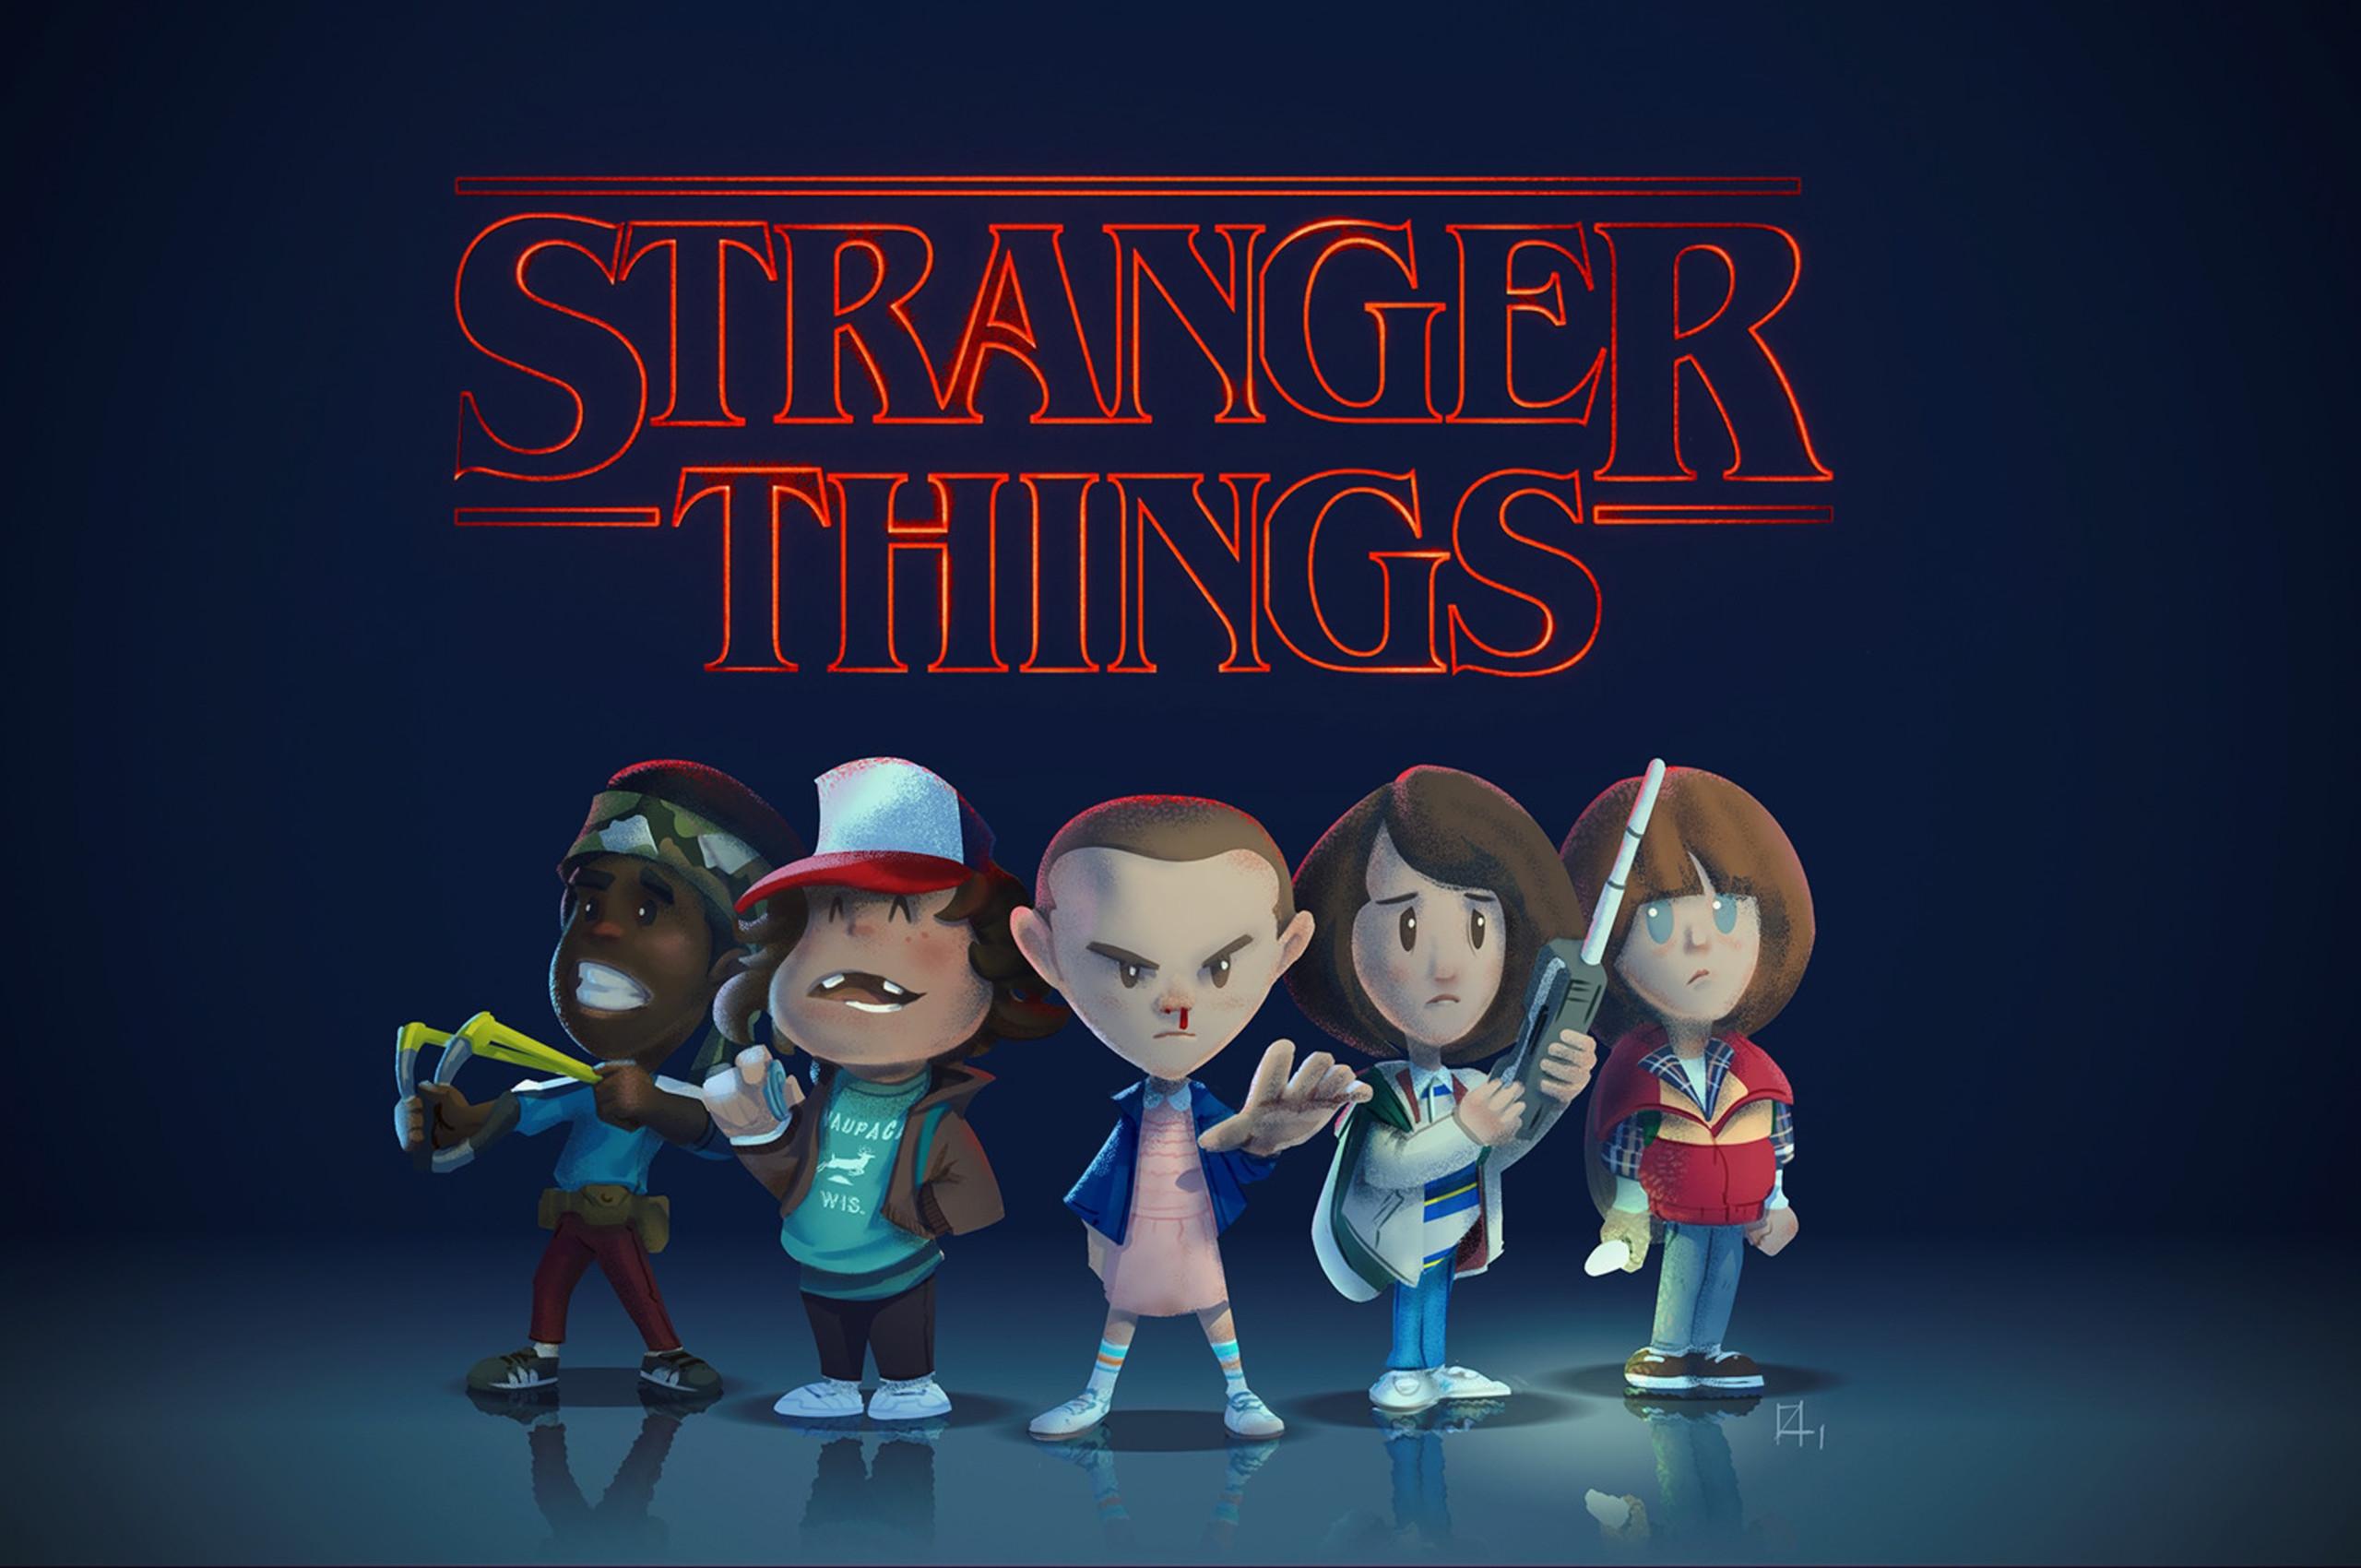 Wall.Cookdiary.net of Stranger Things Wallpaper HD